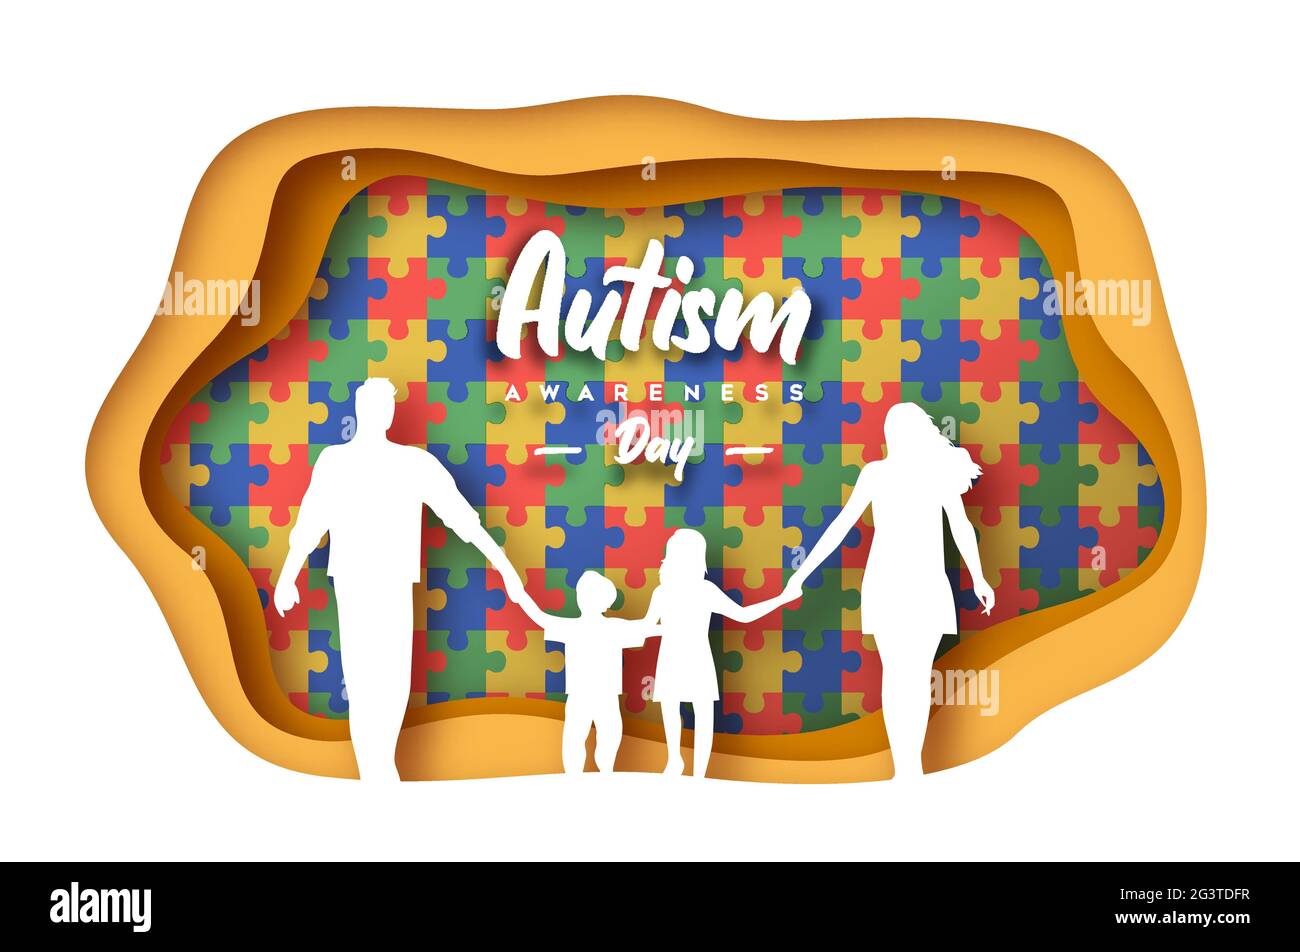 Autism awareness day greeting card illustration of family with children in paper cut style, colorful puzzle background. Kid education concept, differe Stock Vector